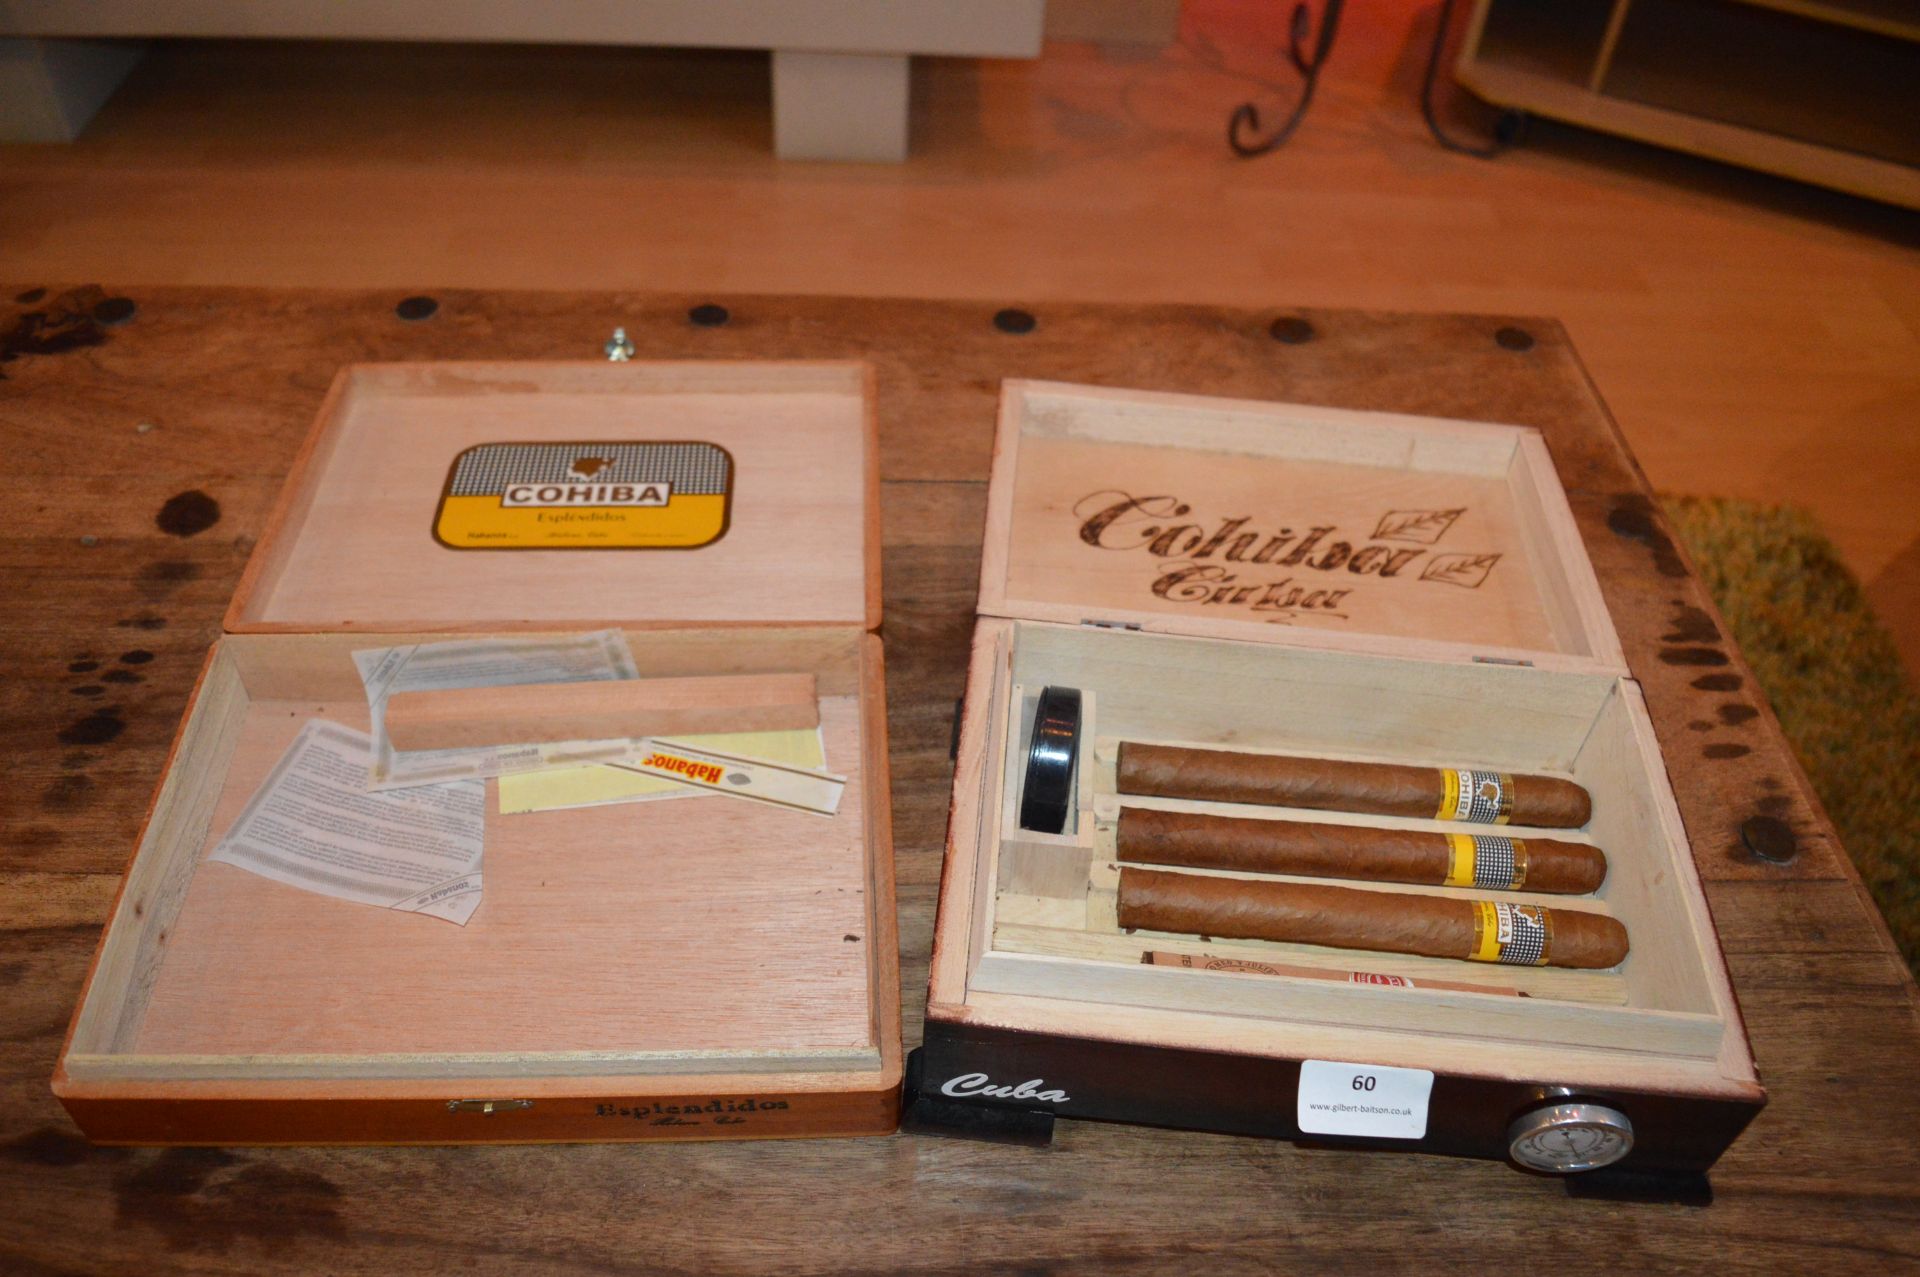 Two Cuban Cigar Boxes and Four Cigars